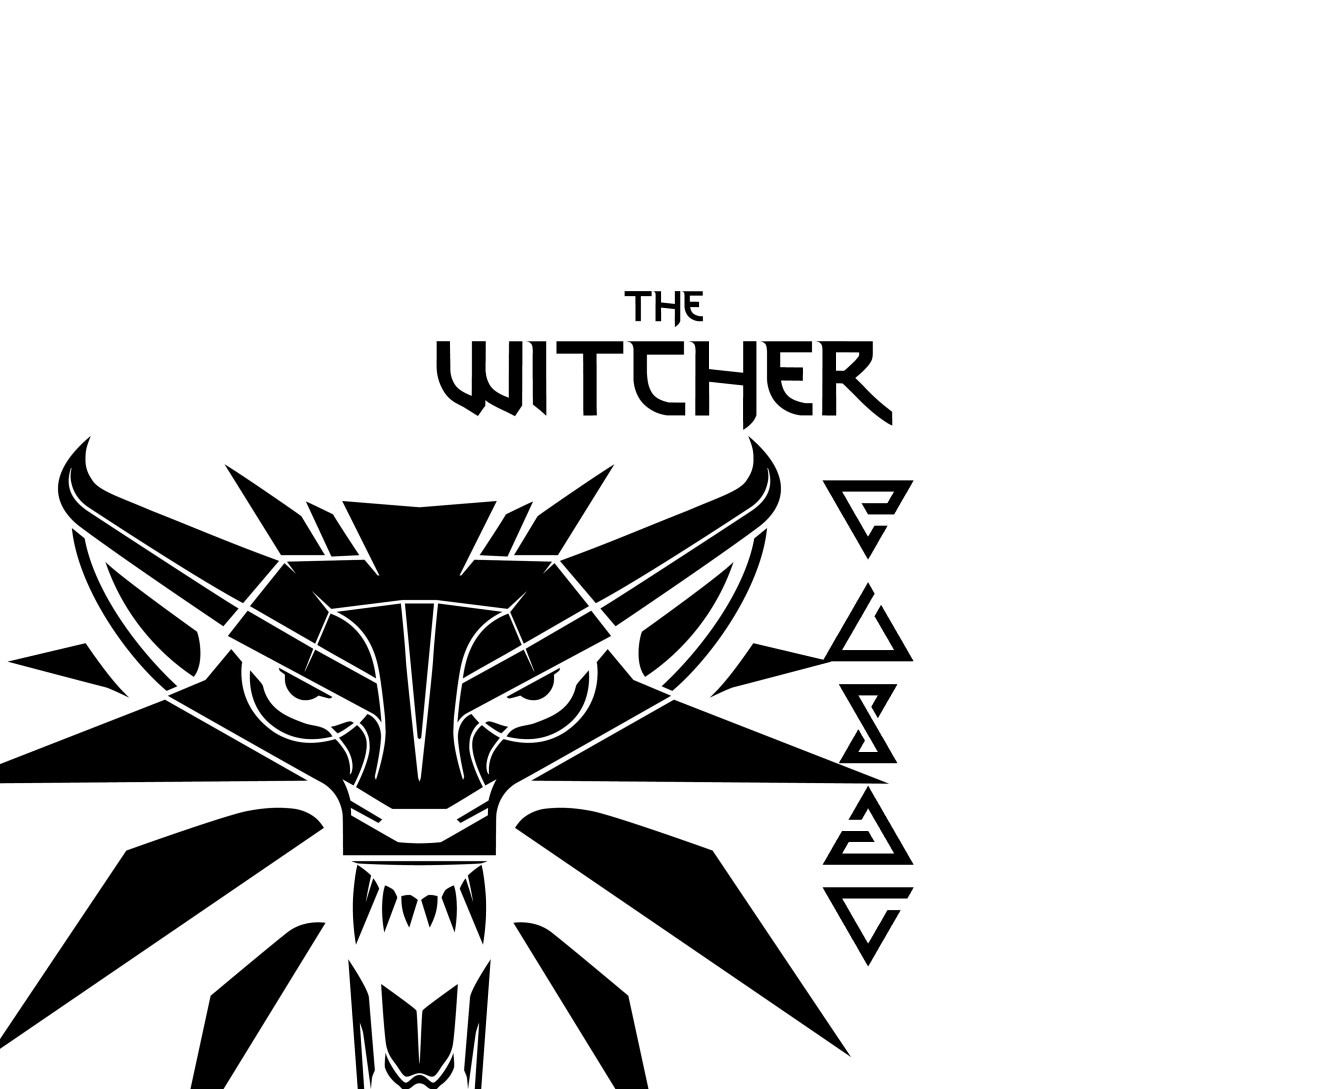 THE WITCHER [29]